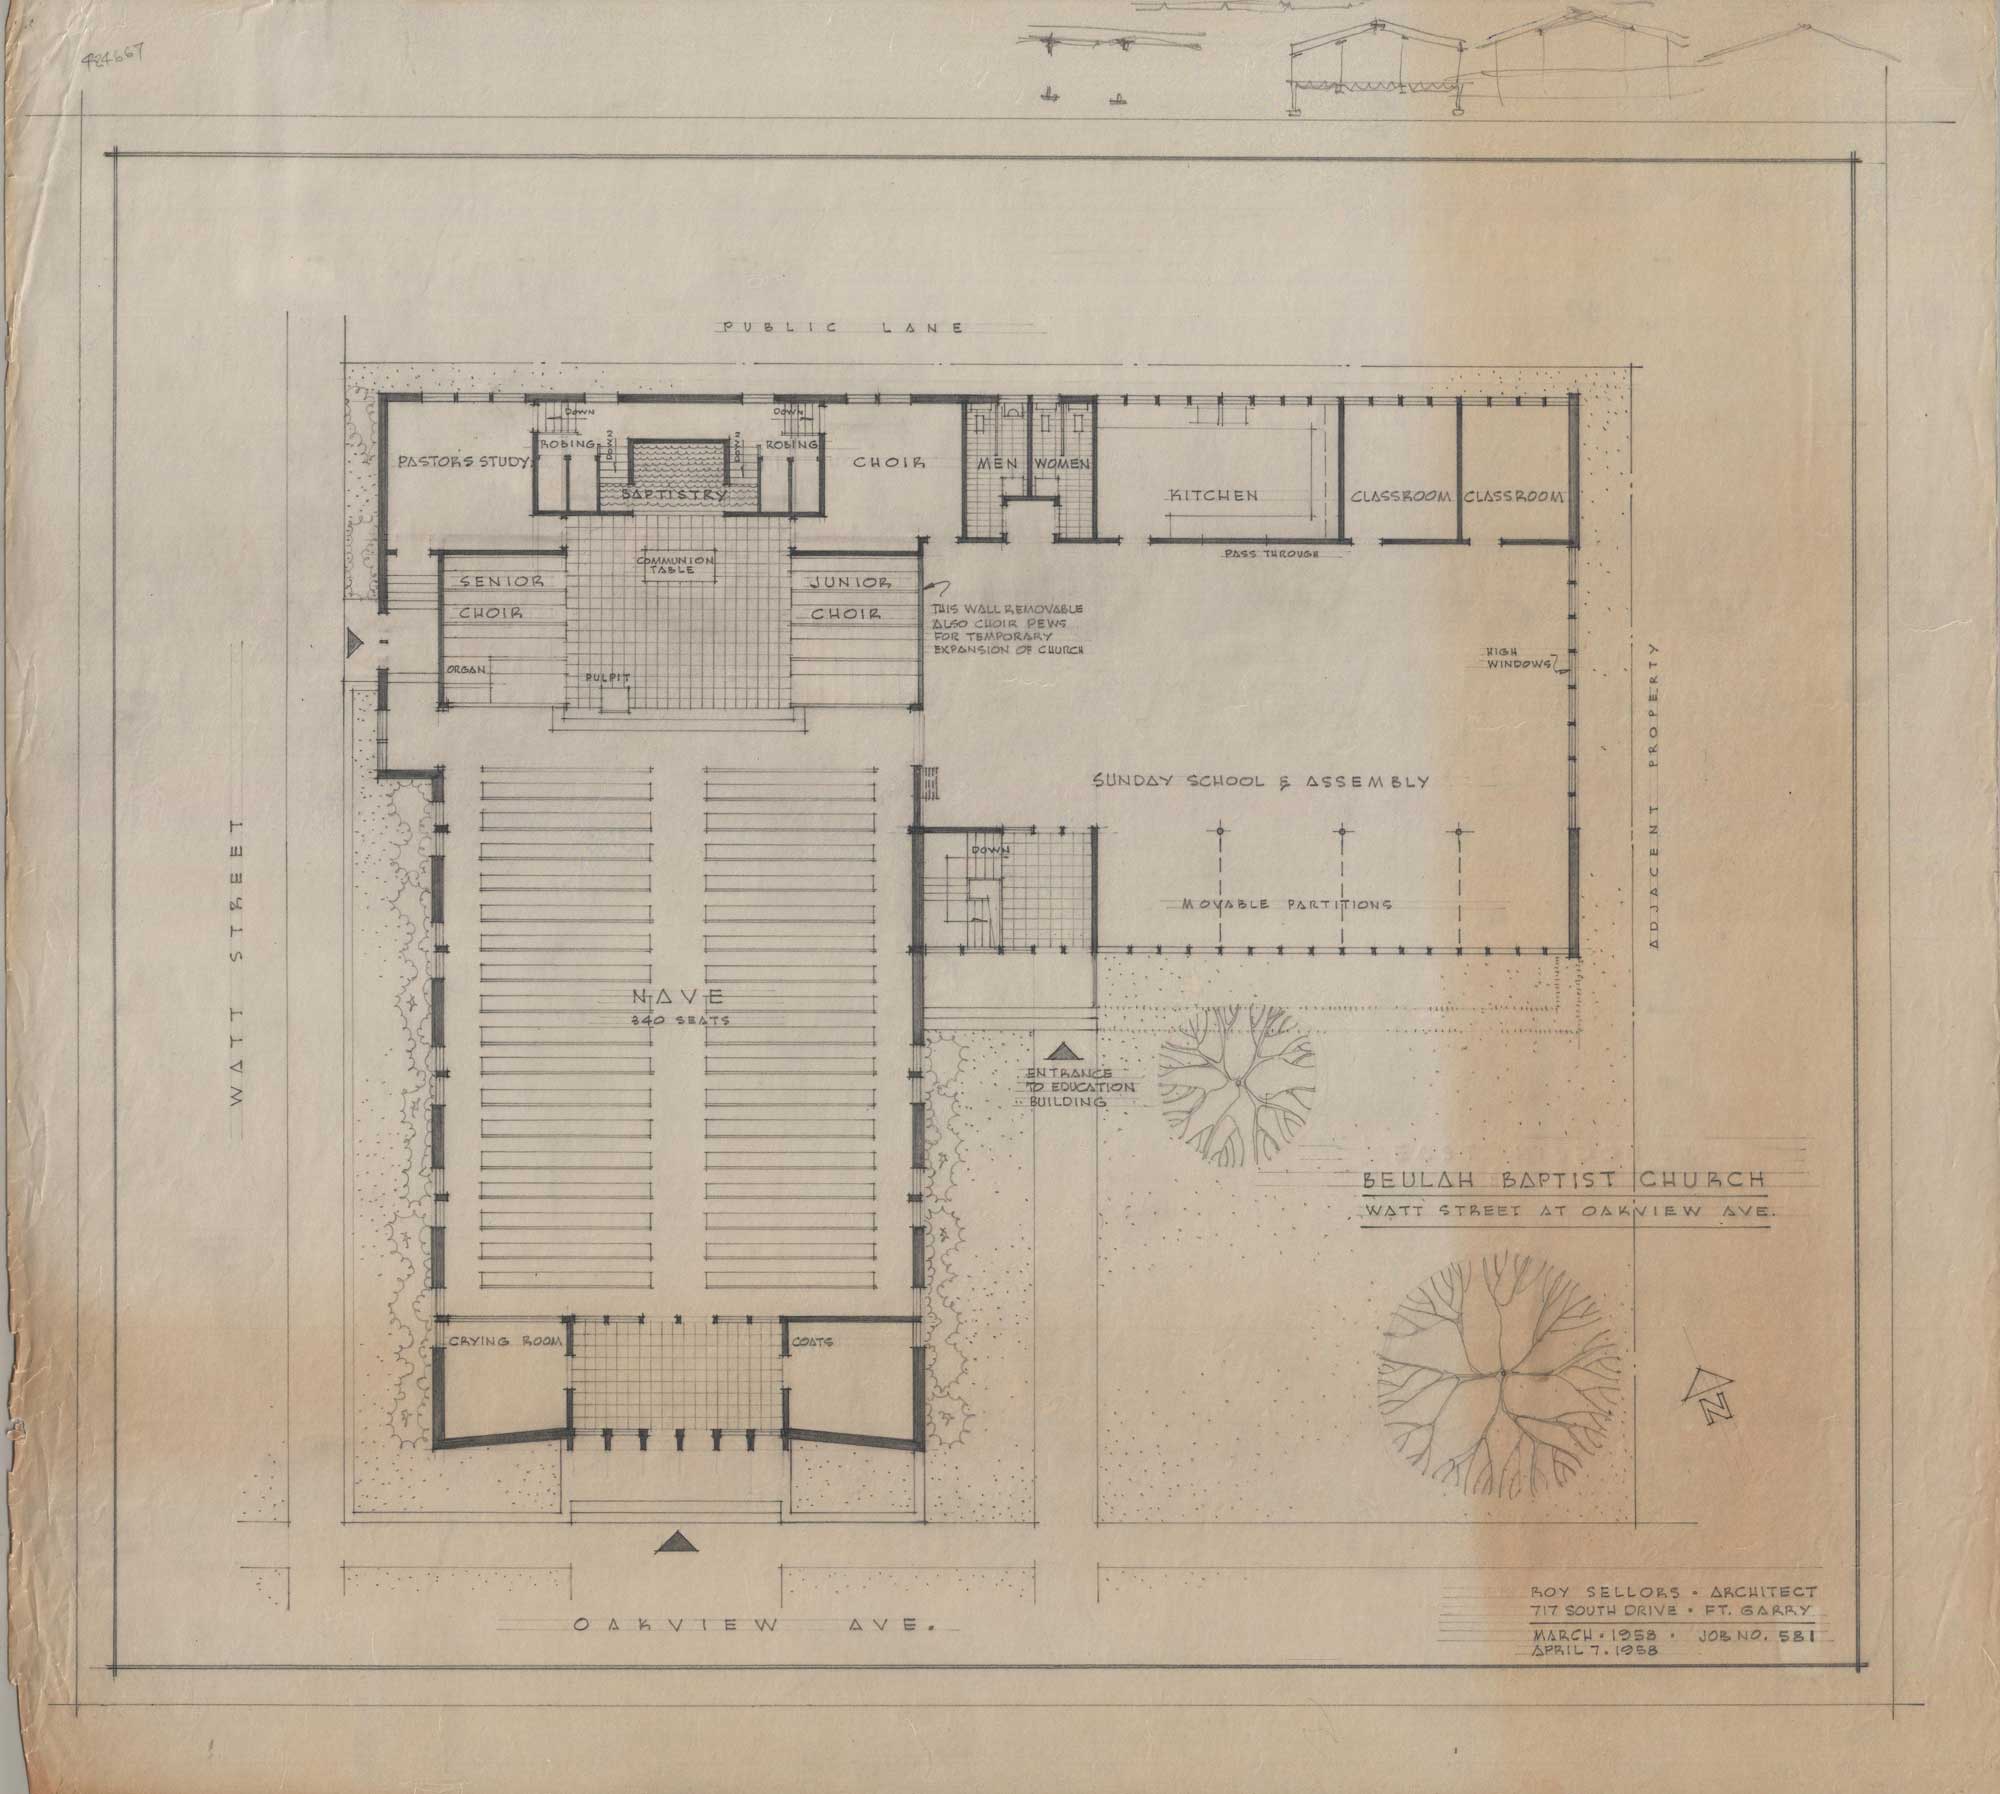 Image shows a drawing of the floorplan for Cornerstone Baptist Church.